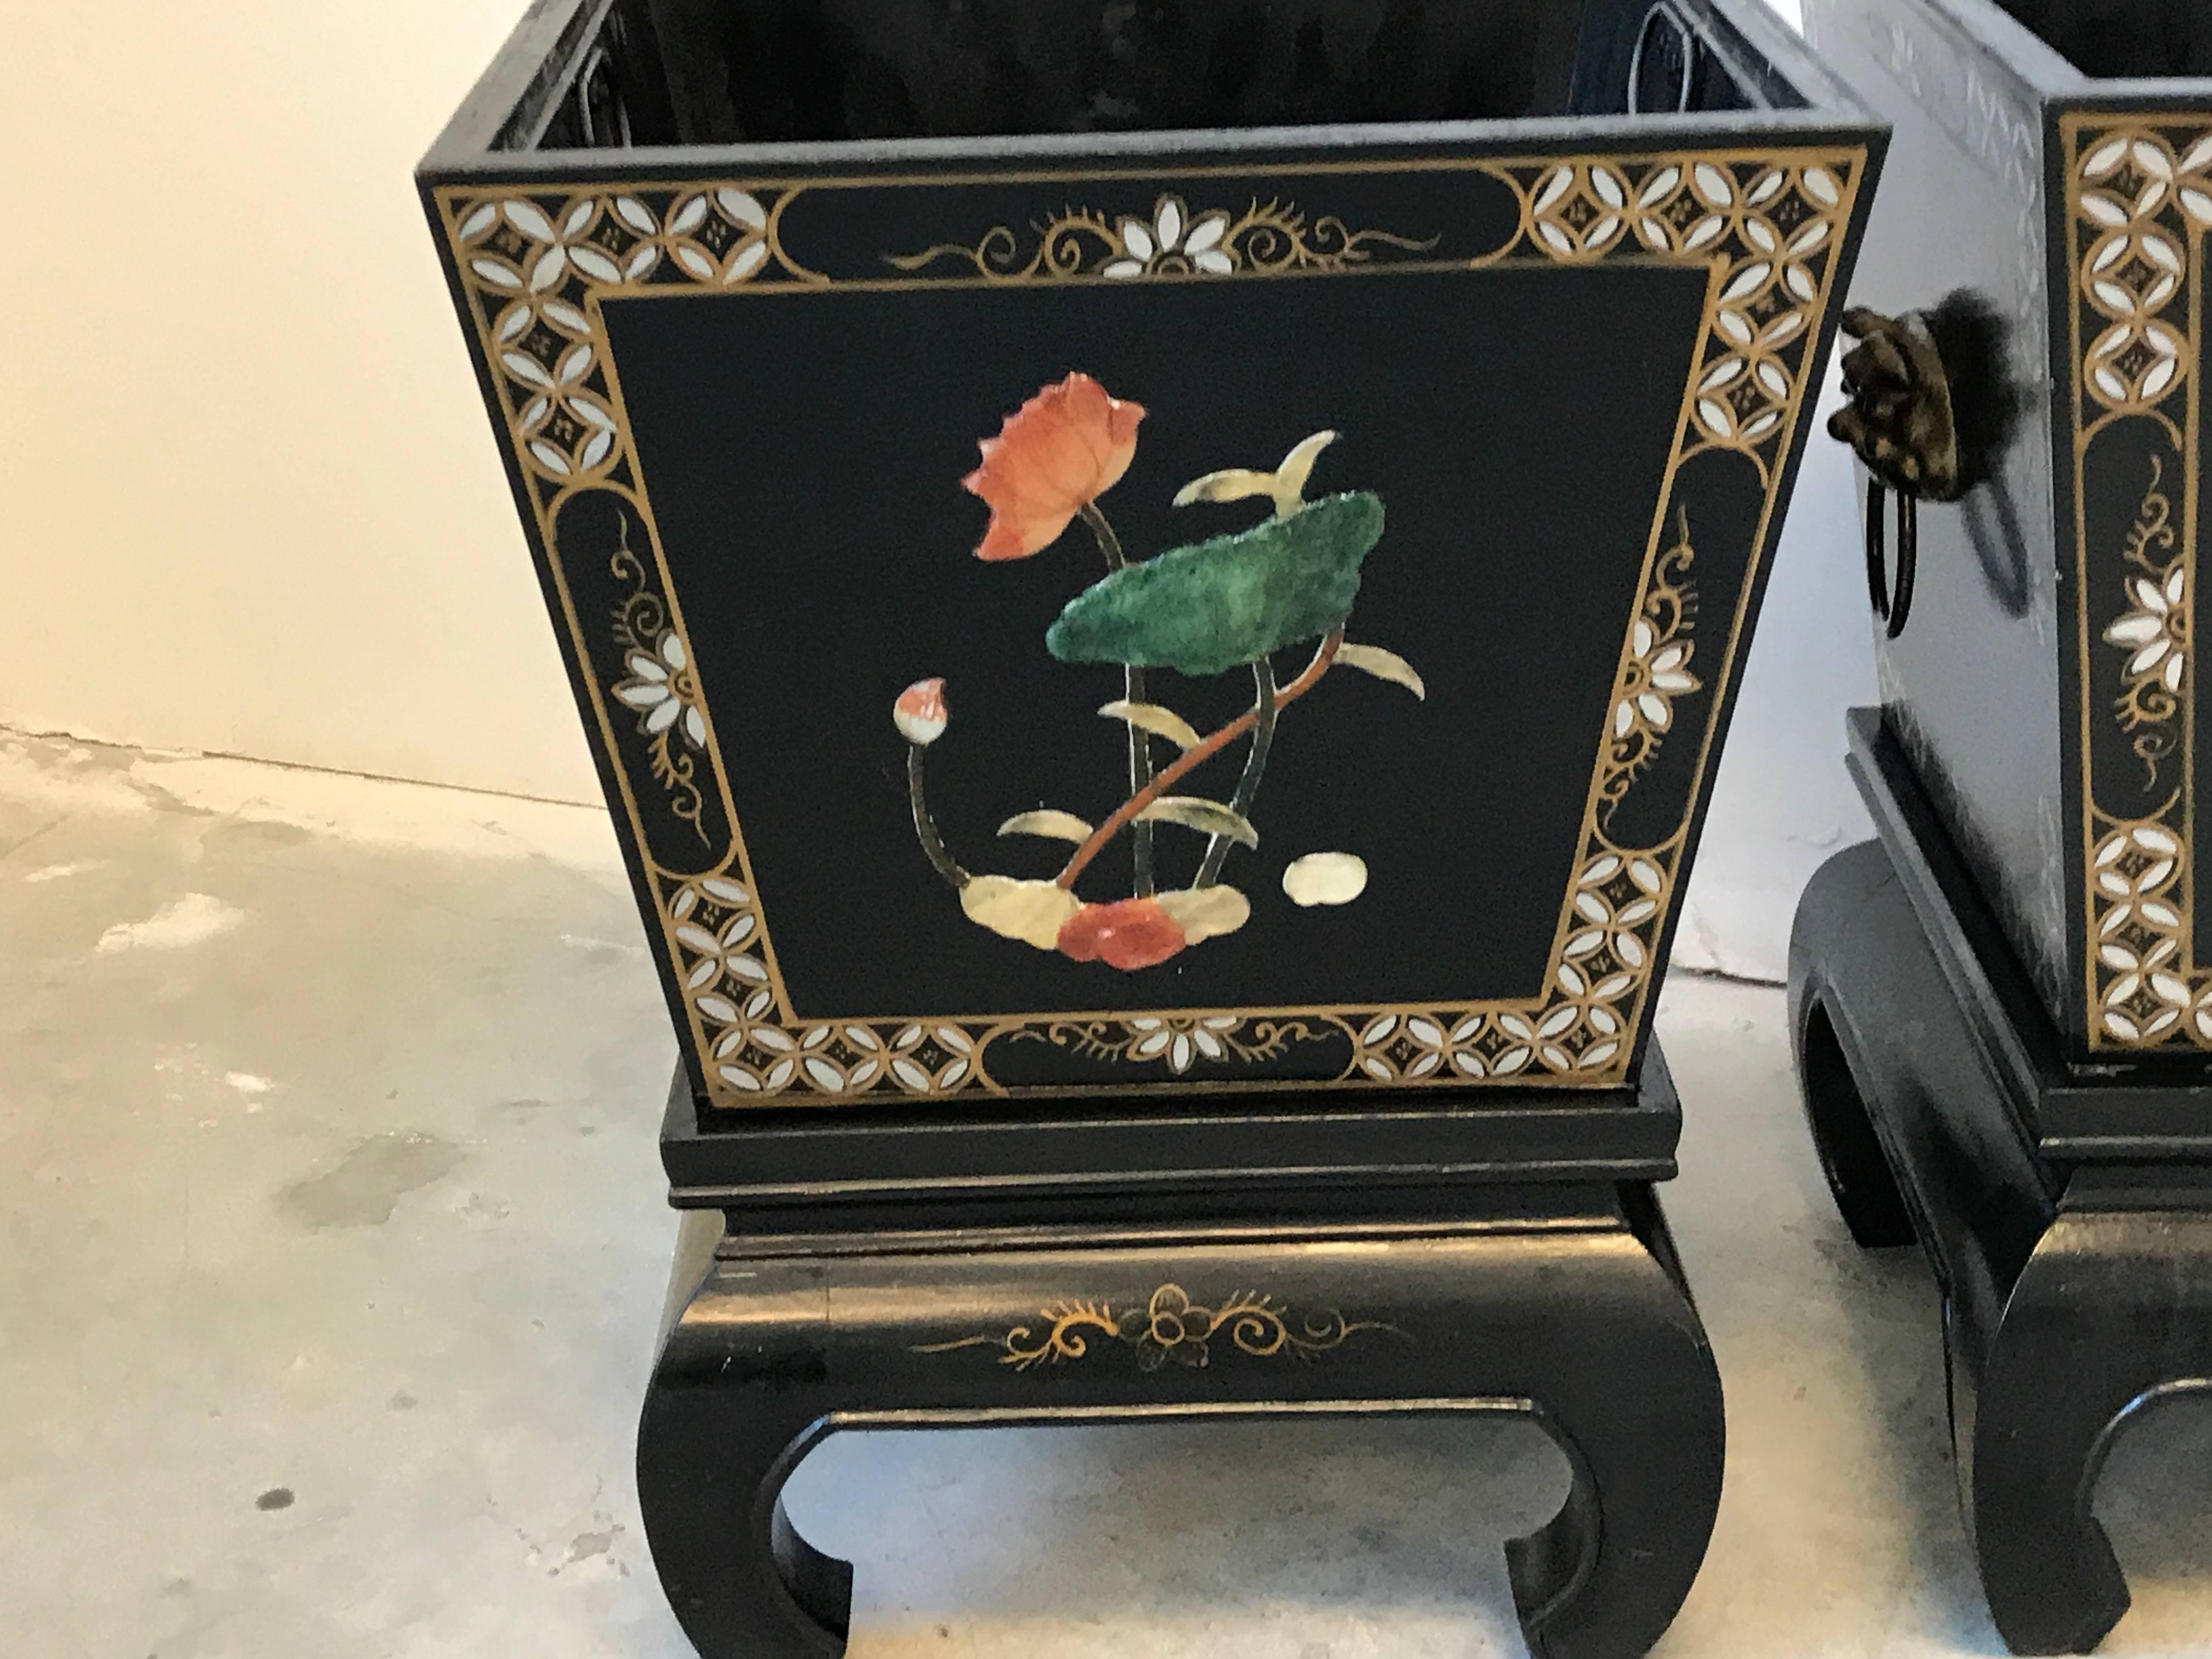 Offered is a gorgeous, pair of 1960s, black and gold Asian planters. Each planter rests on a Ming style stand. Floral motif with stone inlay, hand-painted fretwork border and brass foo dog handles on each. Each includes metal liner.